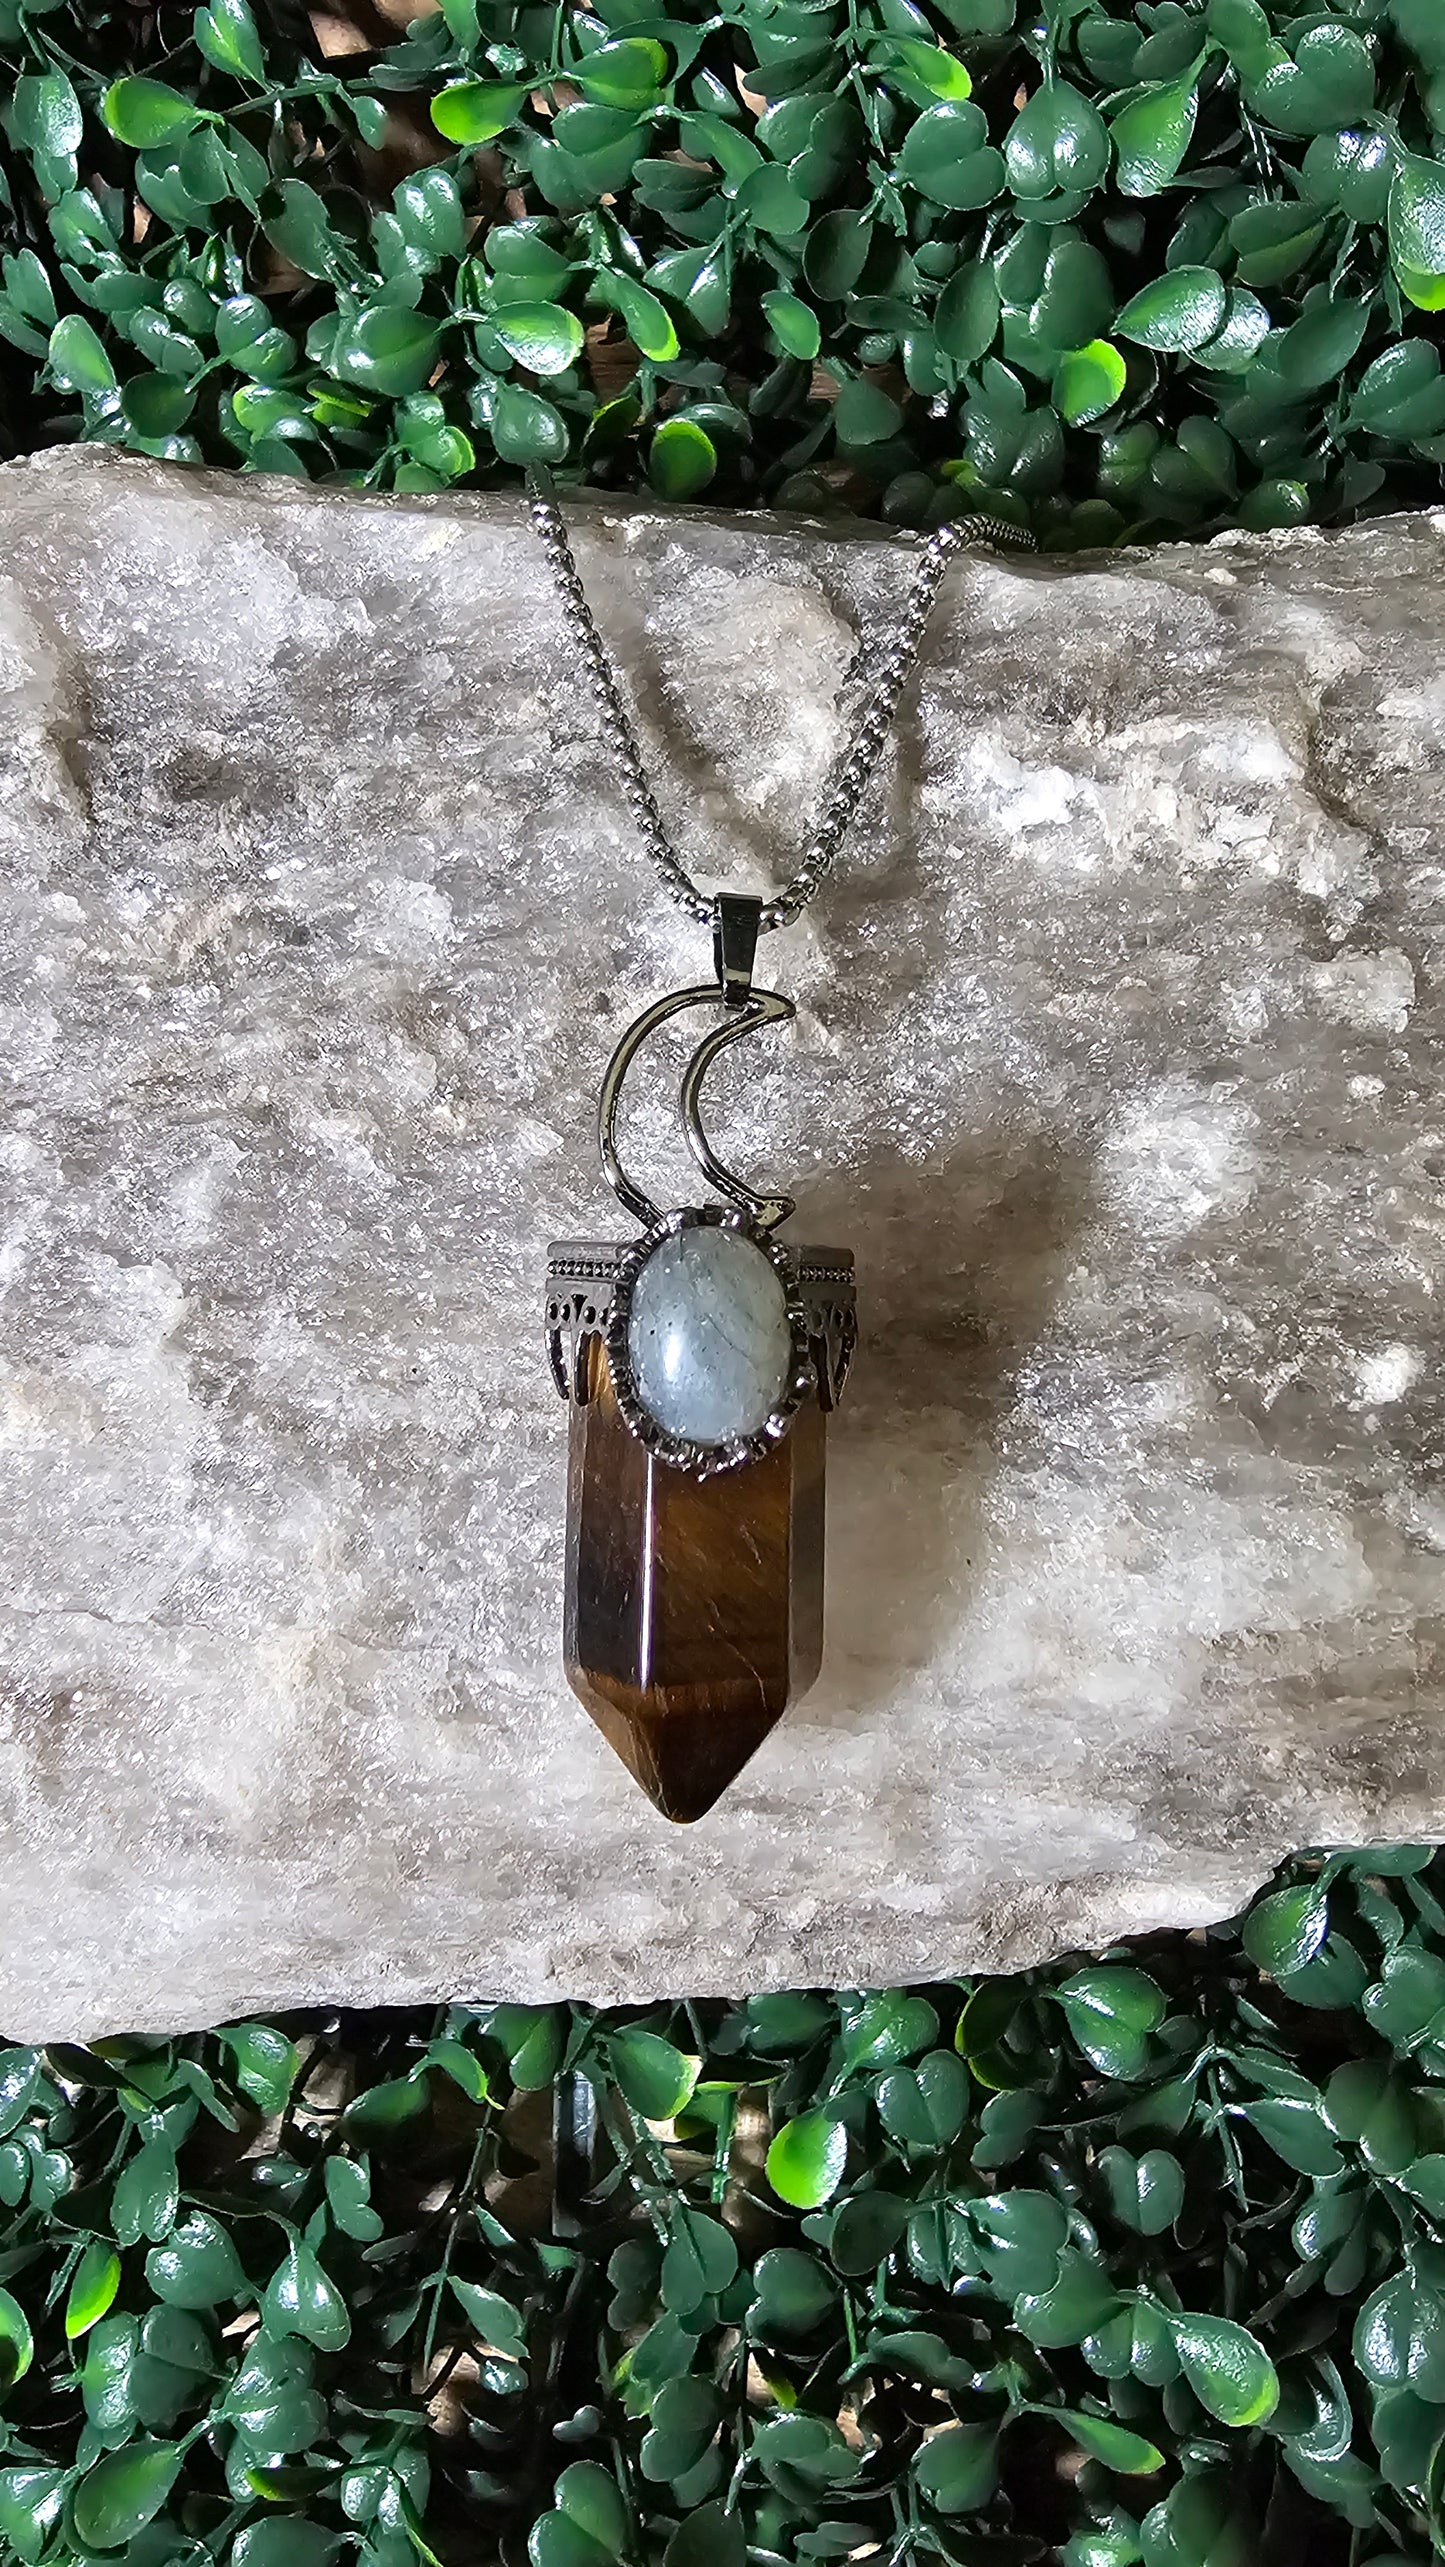 Tigers Eye and Labradorite - Moon Vibes necklace